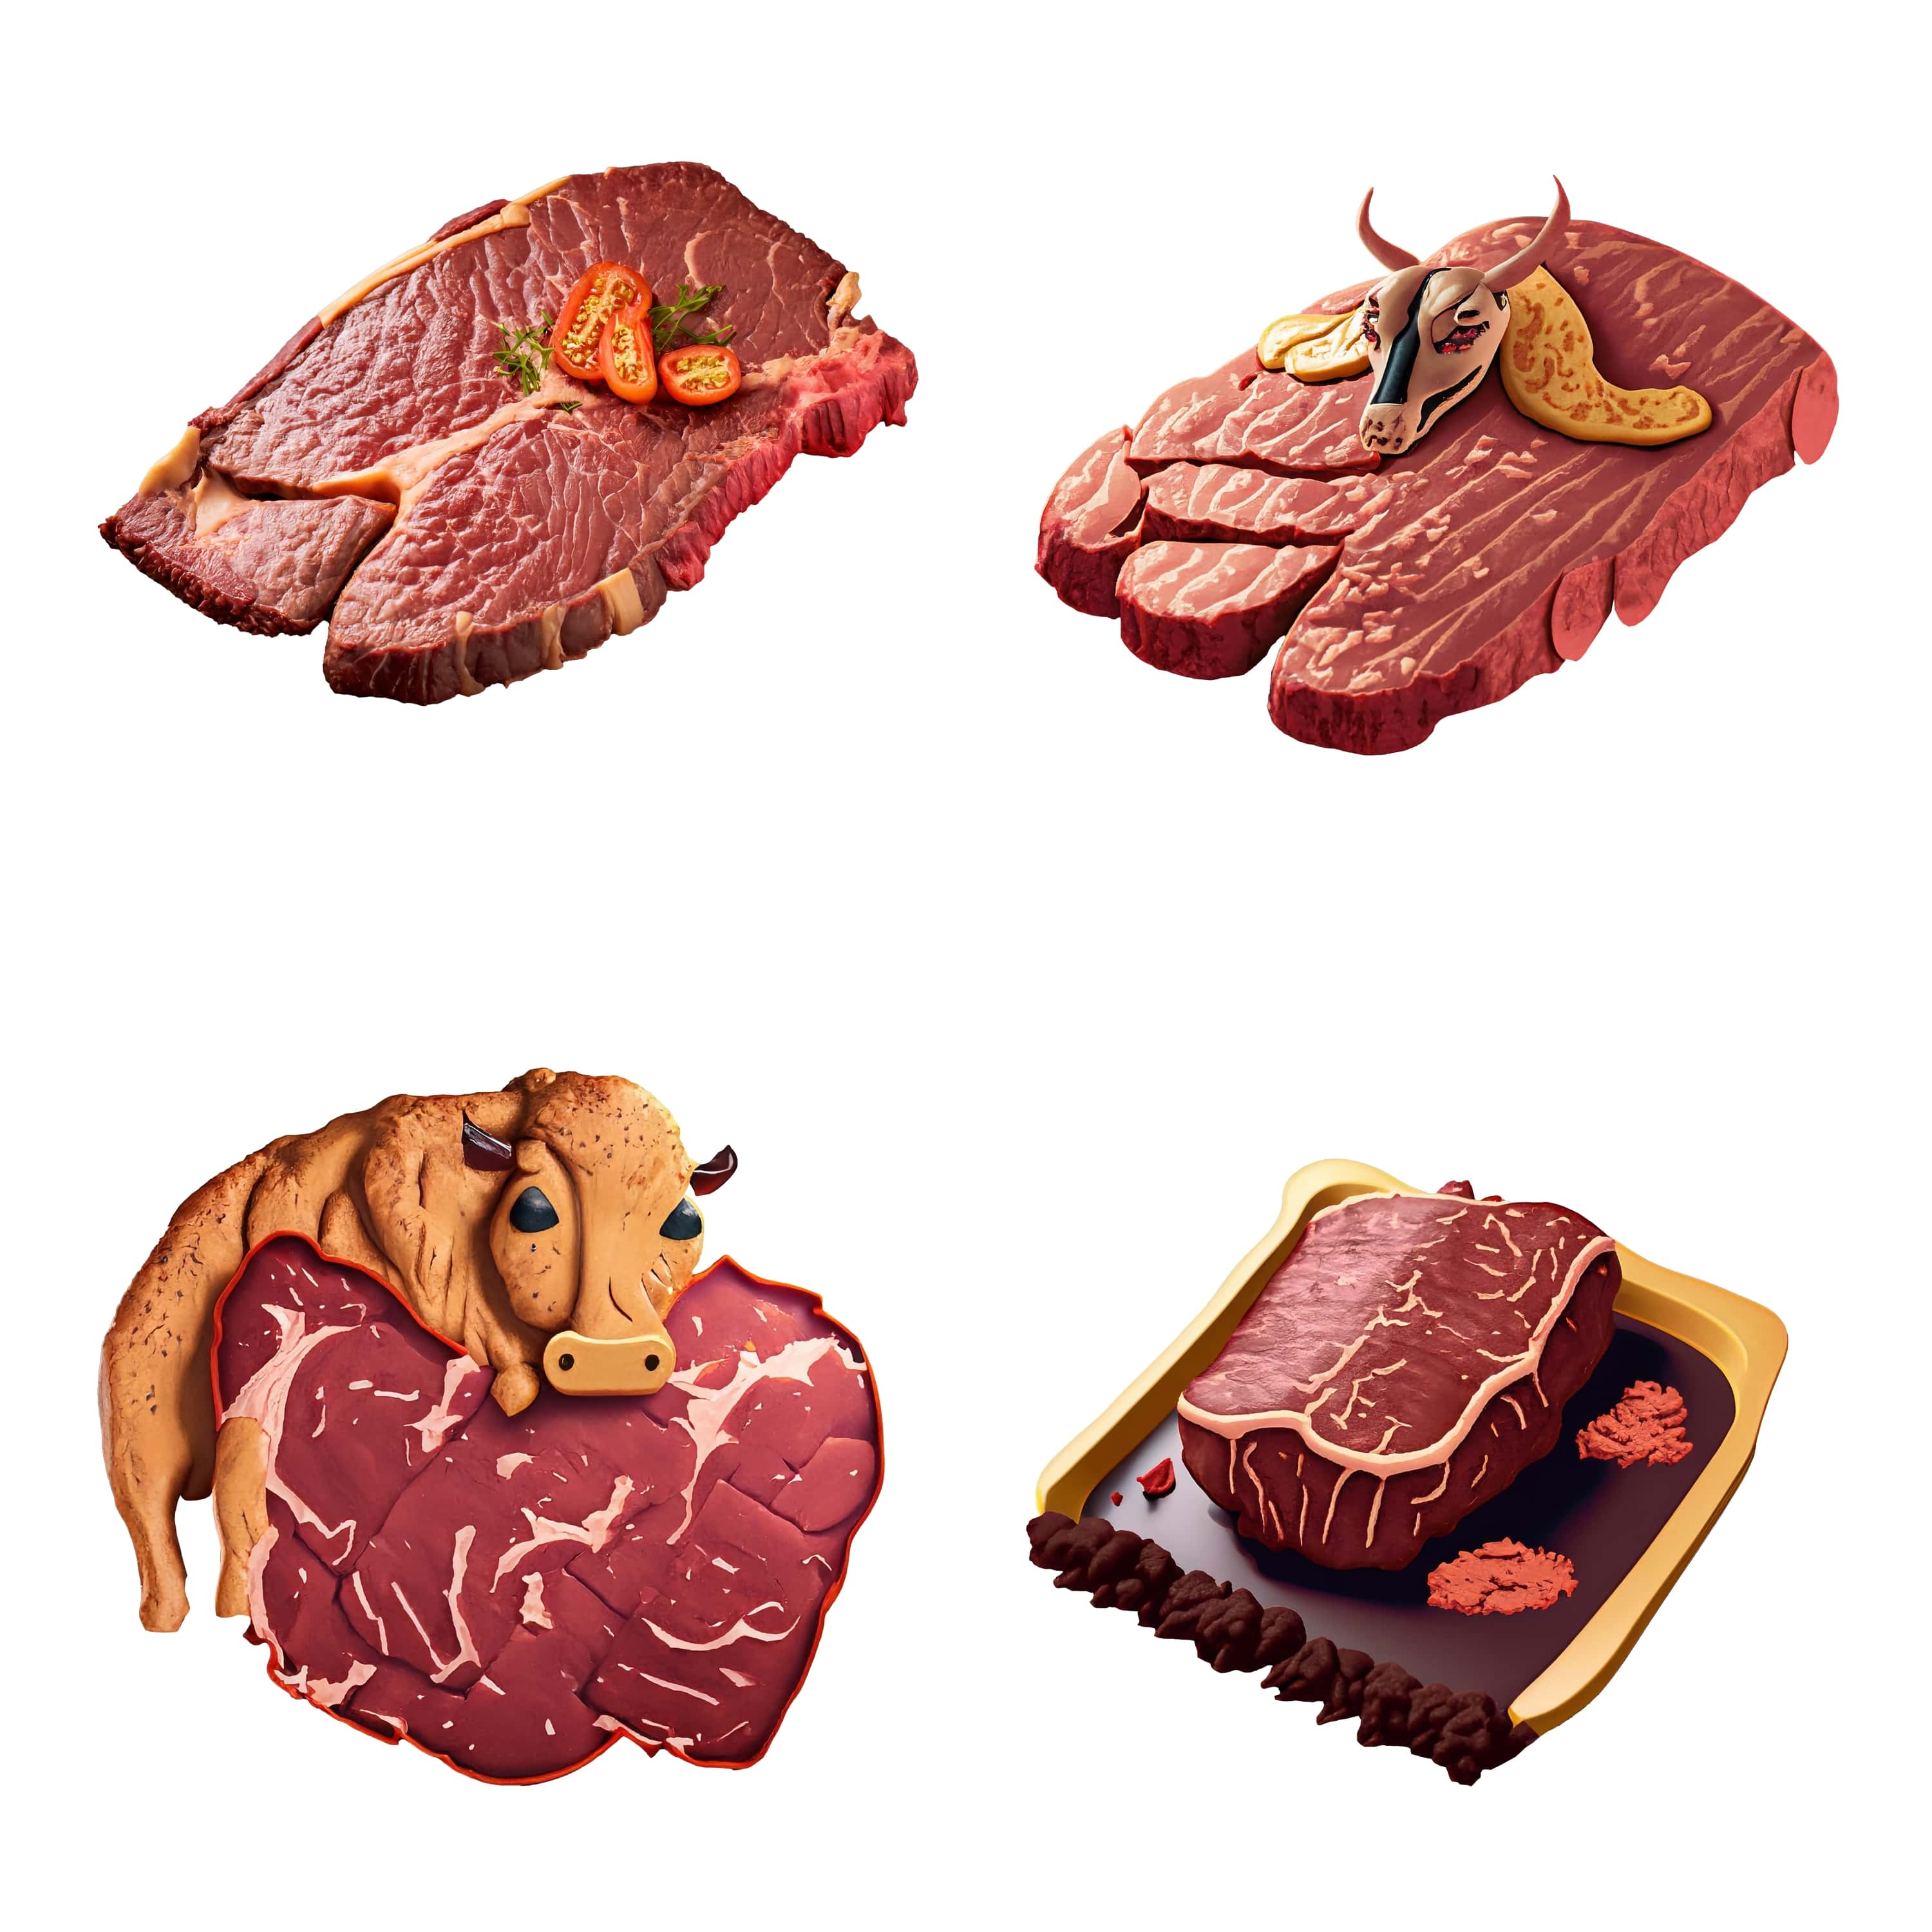 raw beef meat icons set. realistic illustration of raw beef meat icons for web design. 980